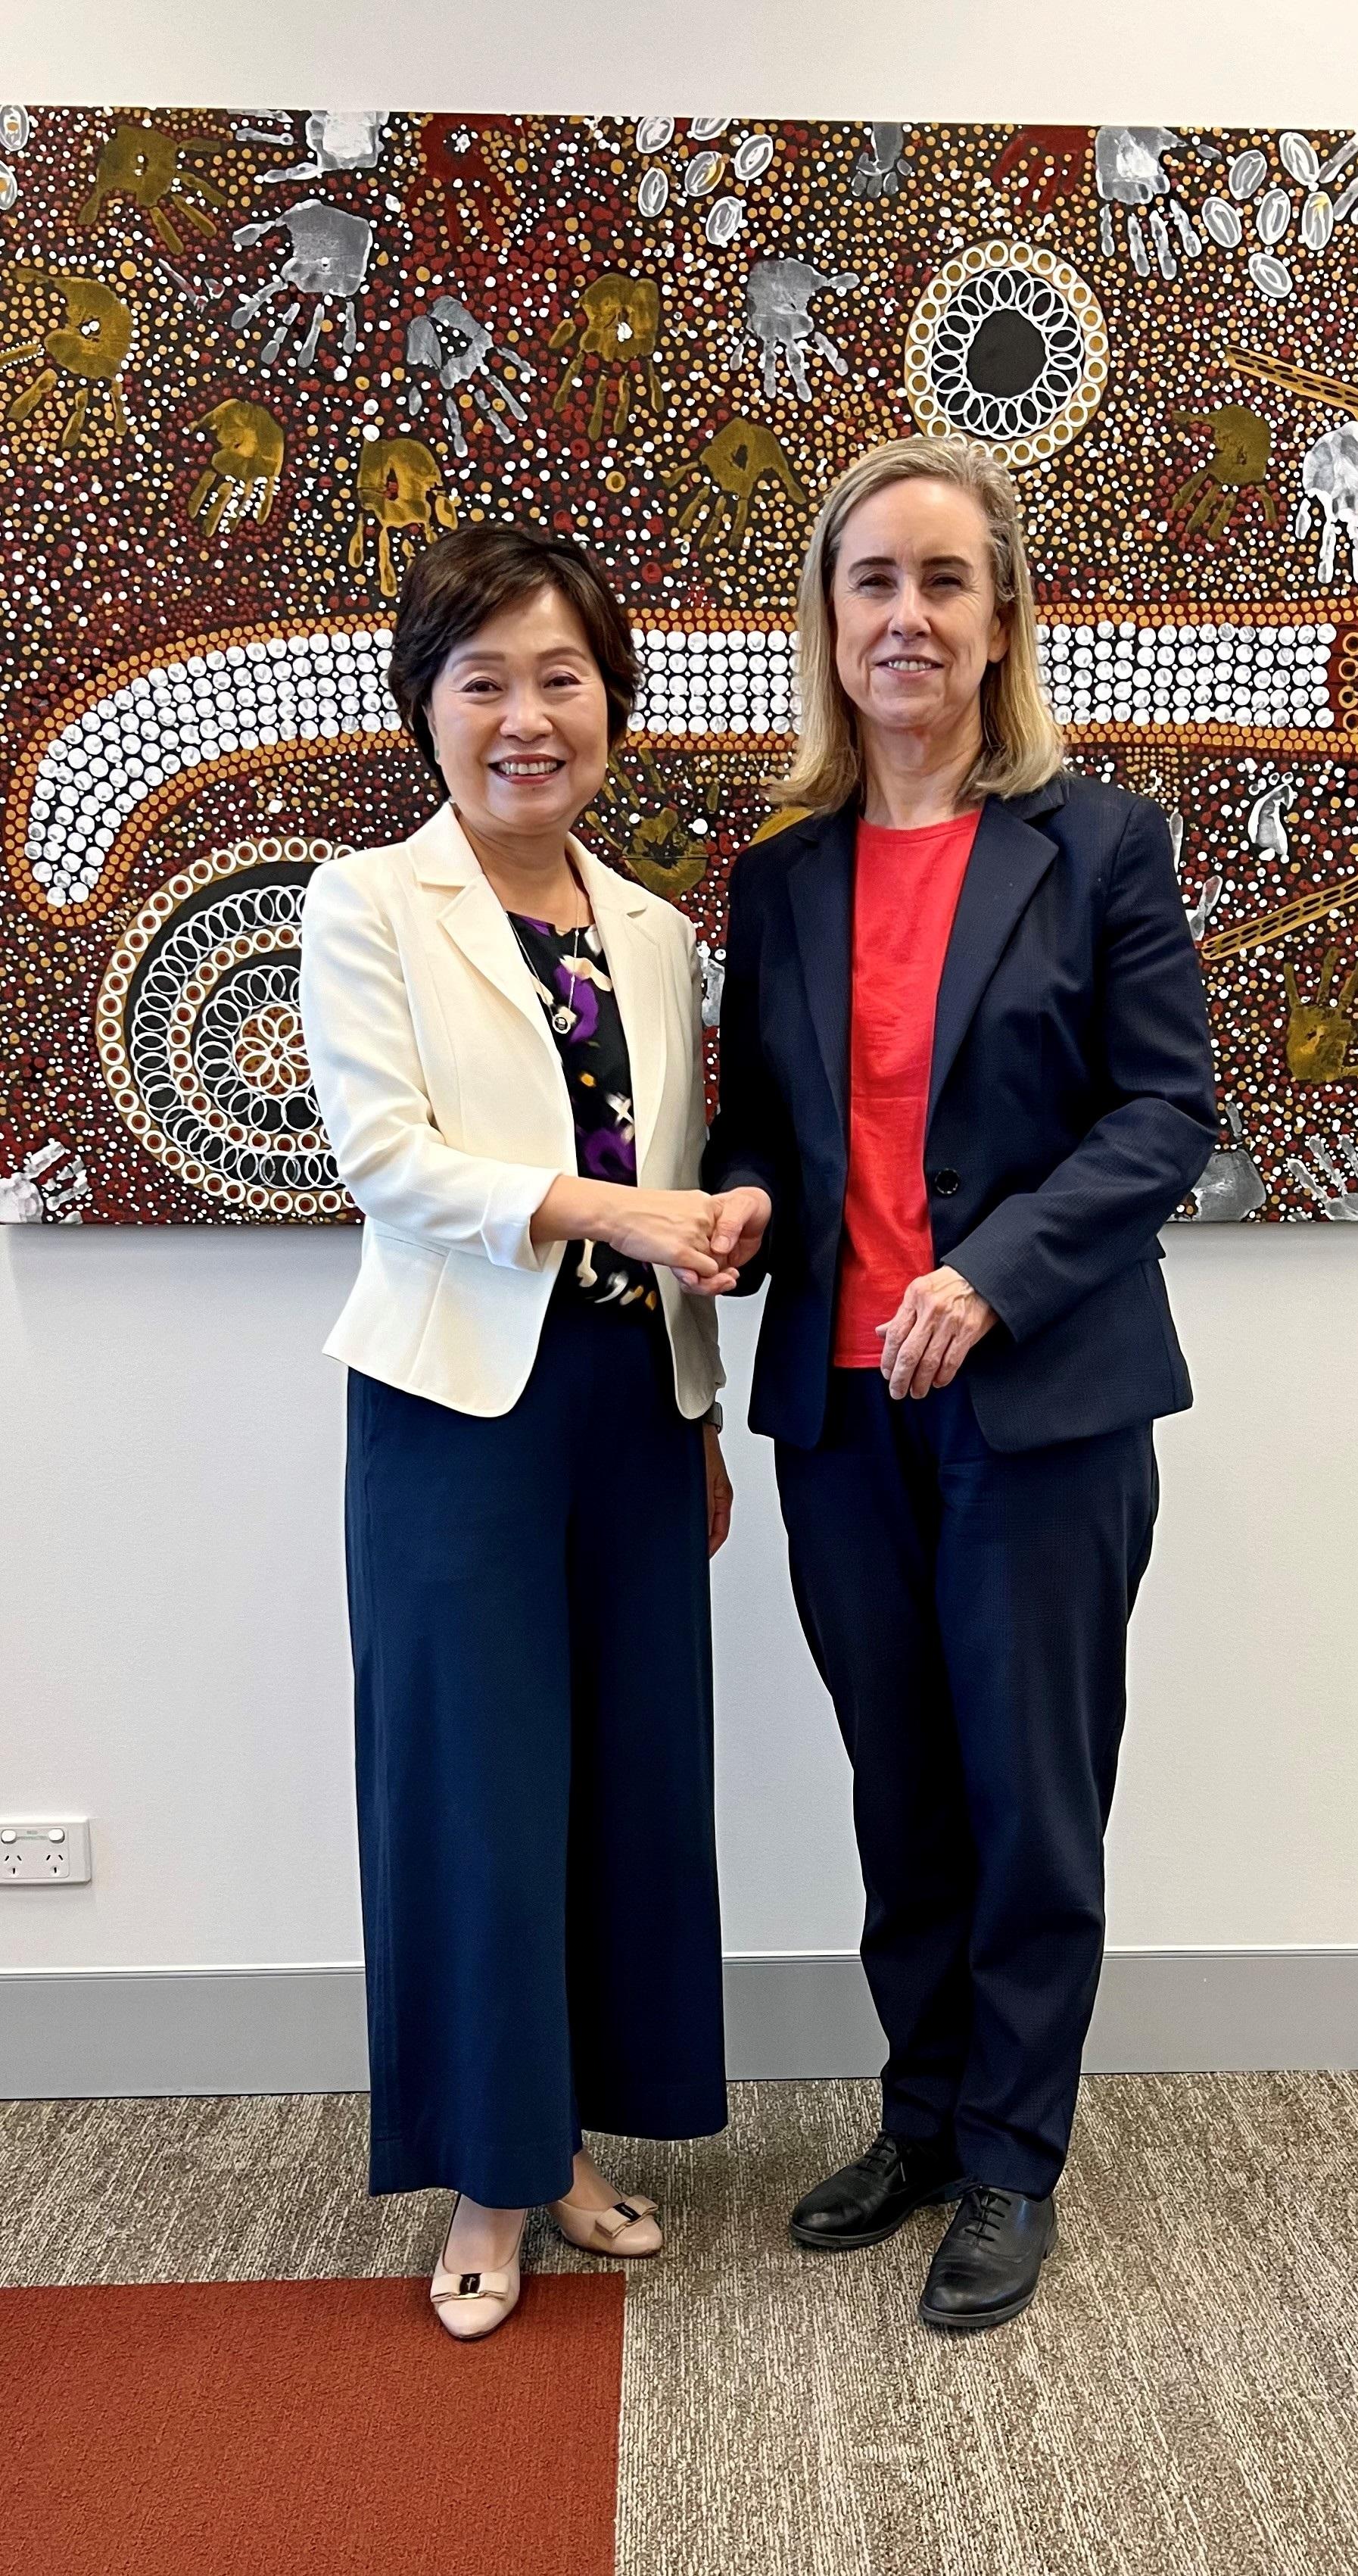 The Secretary for Education, Dr Choi Yuk-lin (left), meets the Minister for Training and Workforce Development; Water; Industrial Relations of Western Australia, Ms Simone McGurk (right), in Perth, Australia, on March 7 (Perth time).